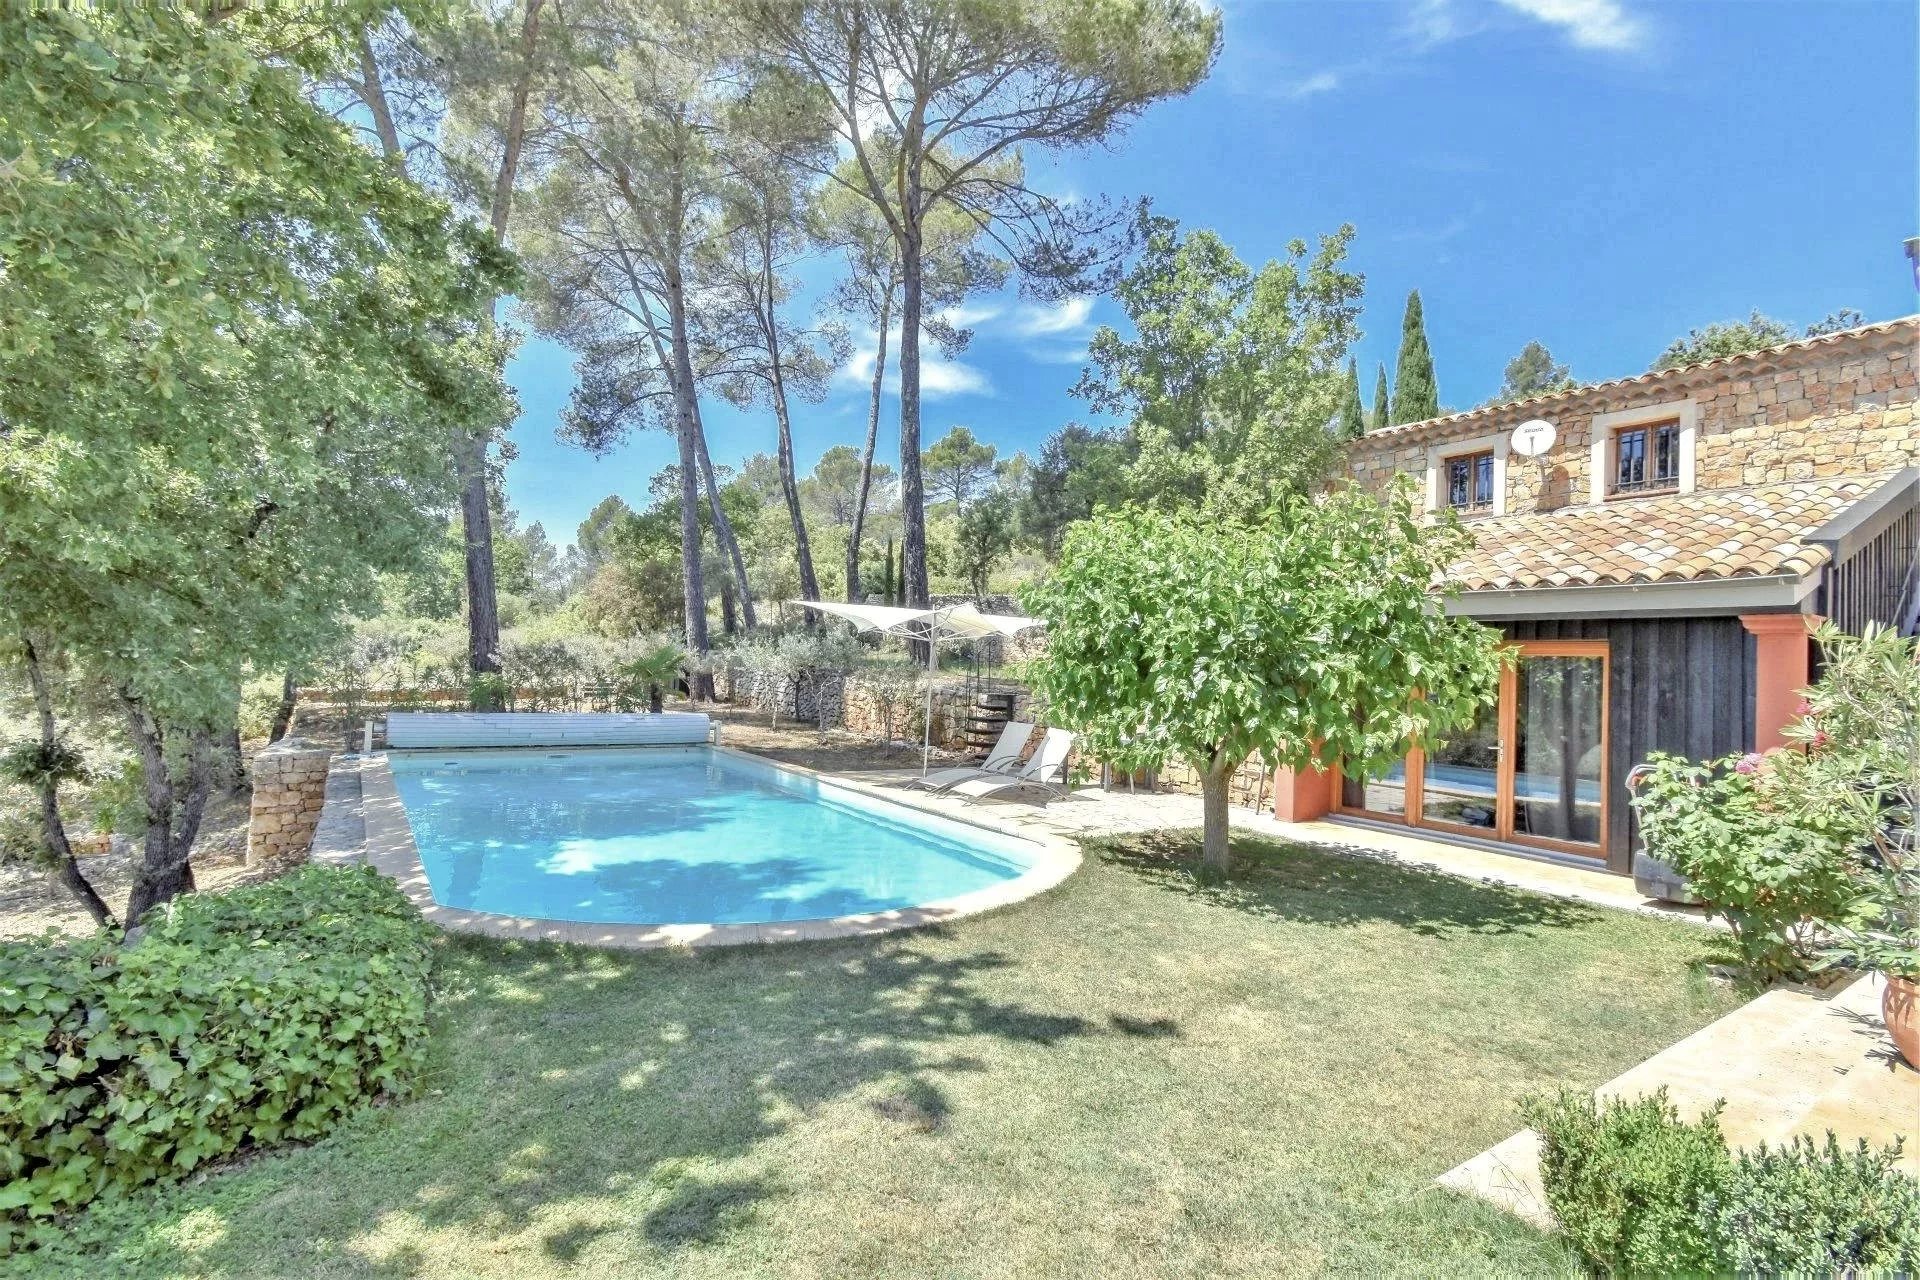 Stylish achitect villa settled in a green paradise with beautiful panoramic views.